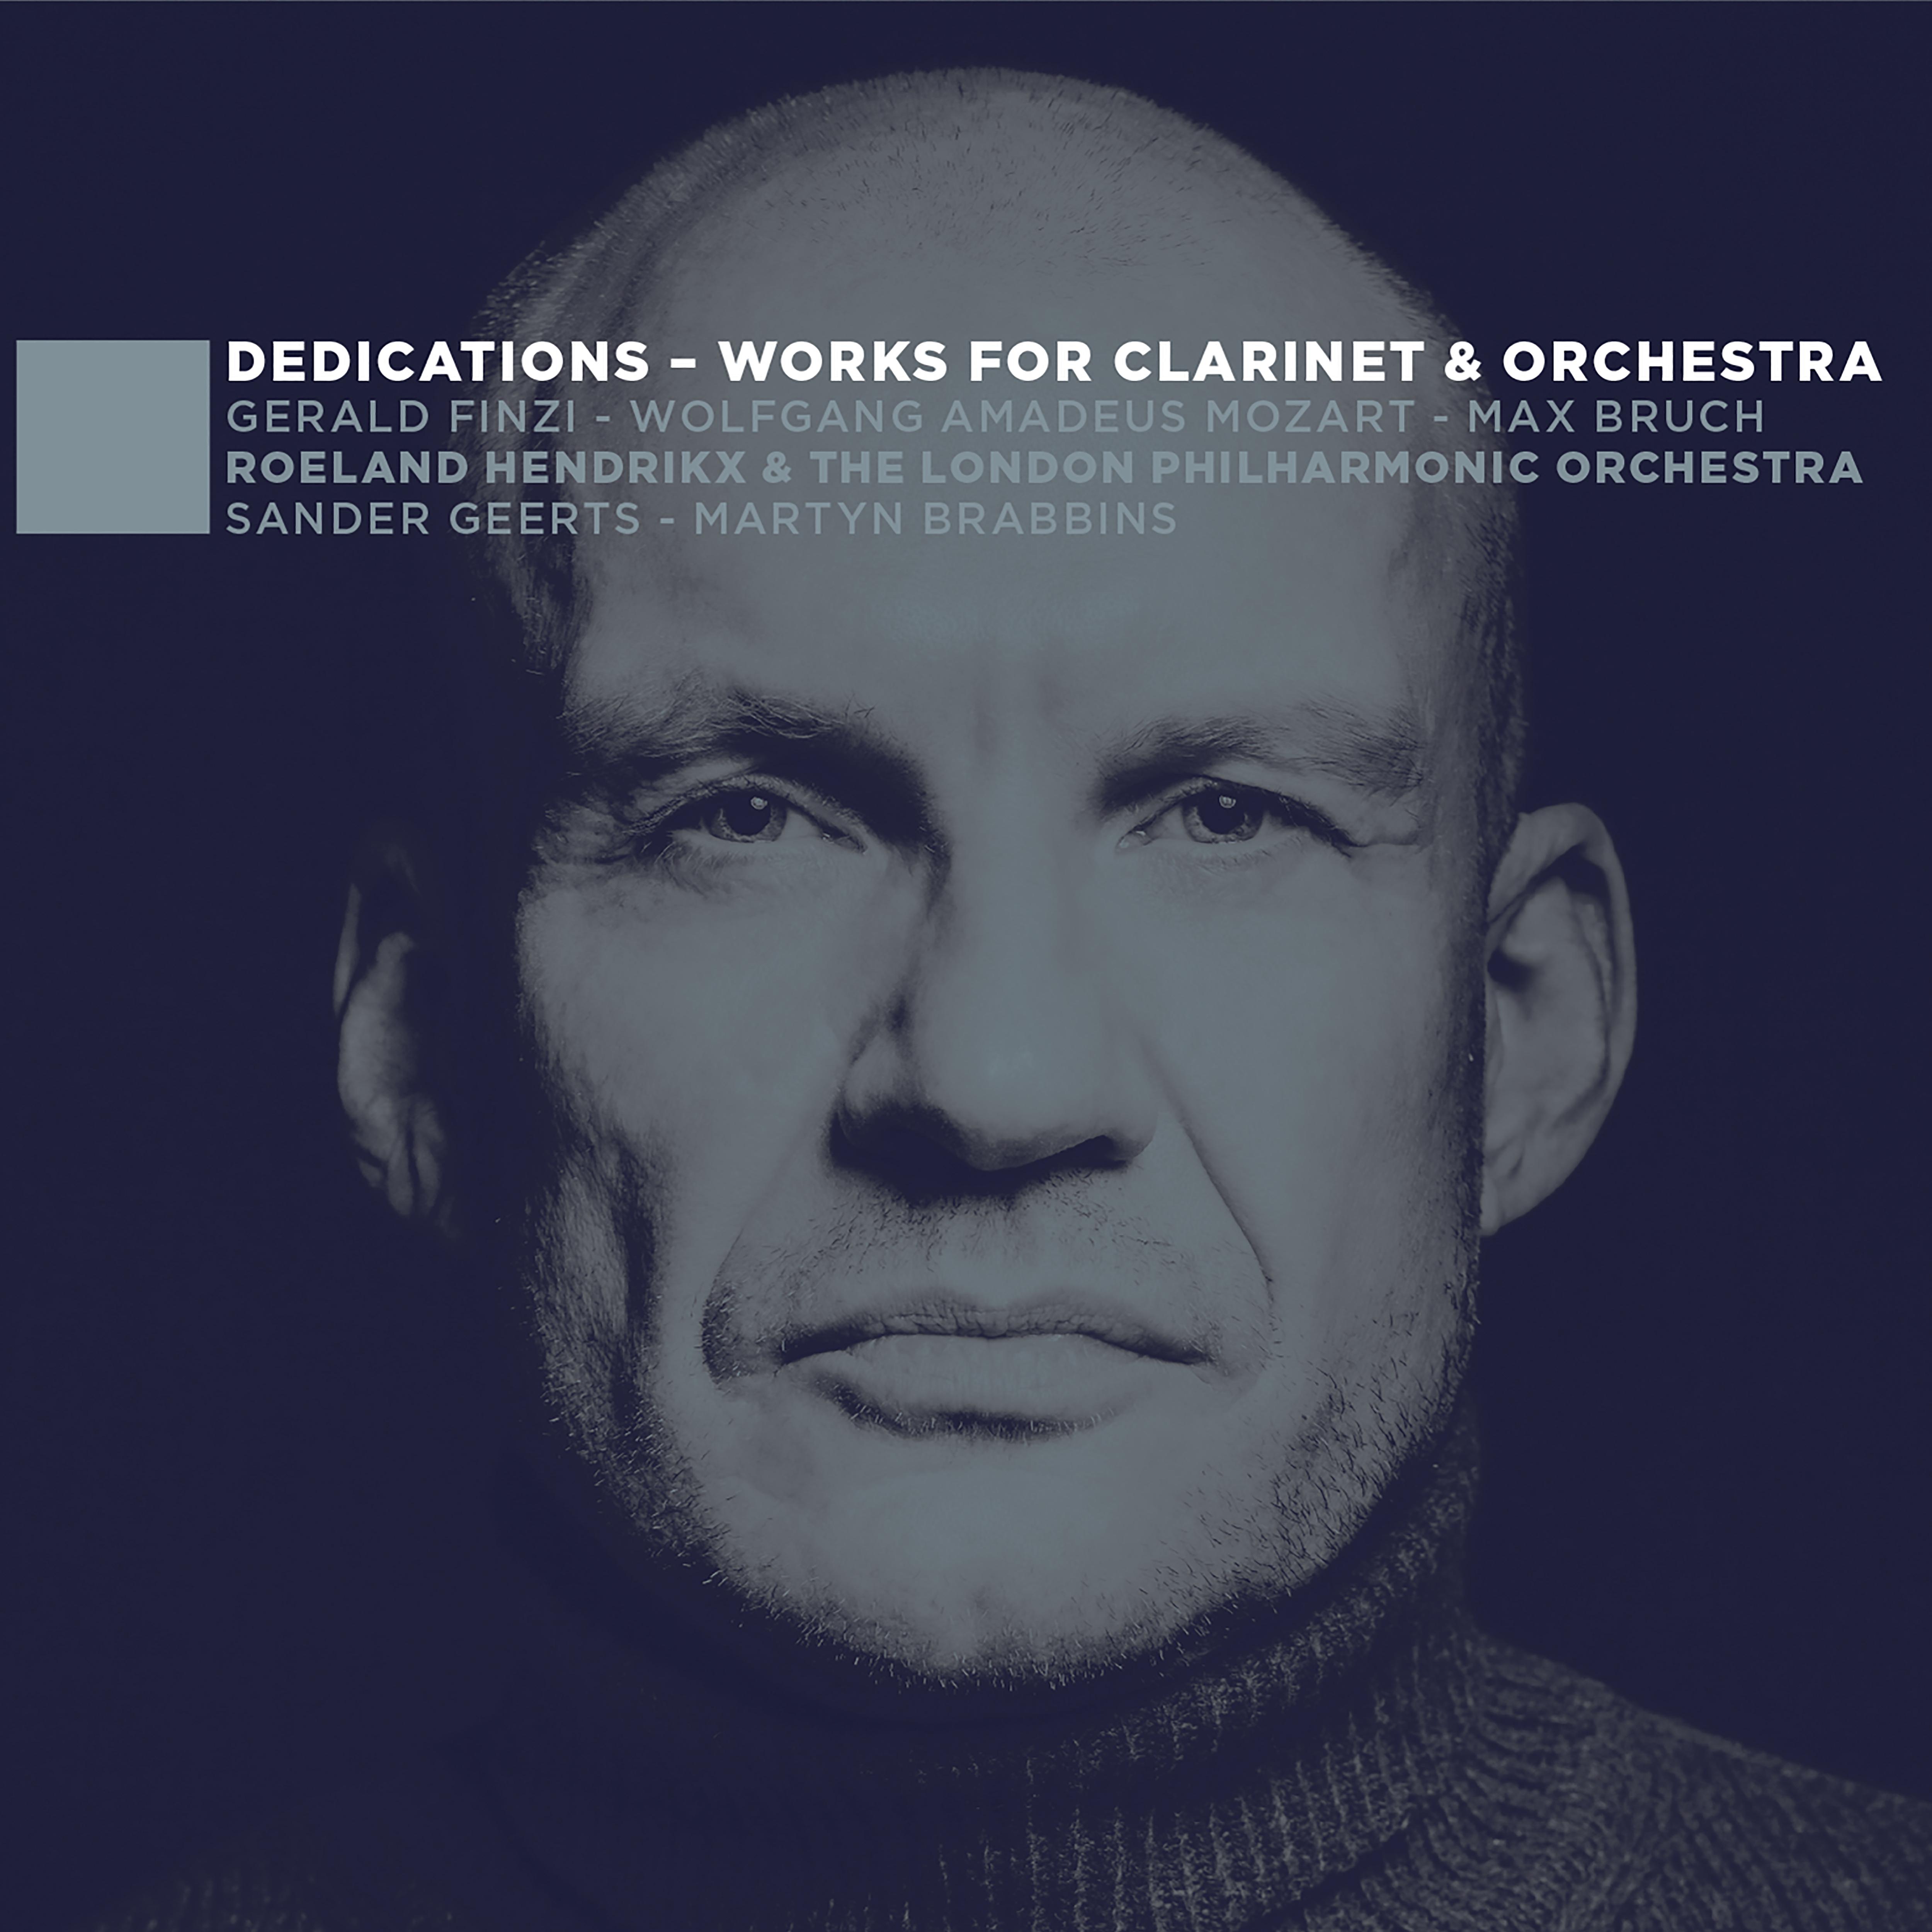 Double Concerto for Clarinet and Viola with Orchestra, Op. 88: III. Allegro molto